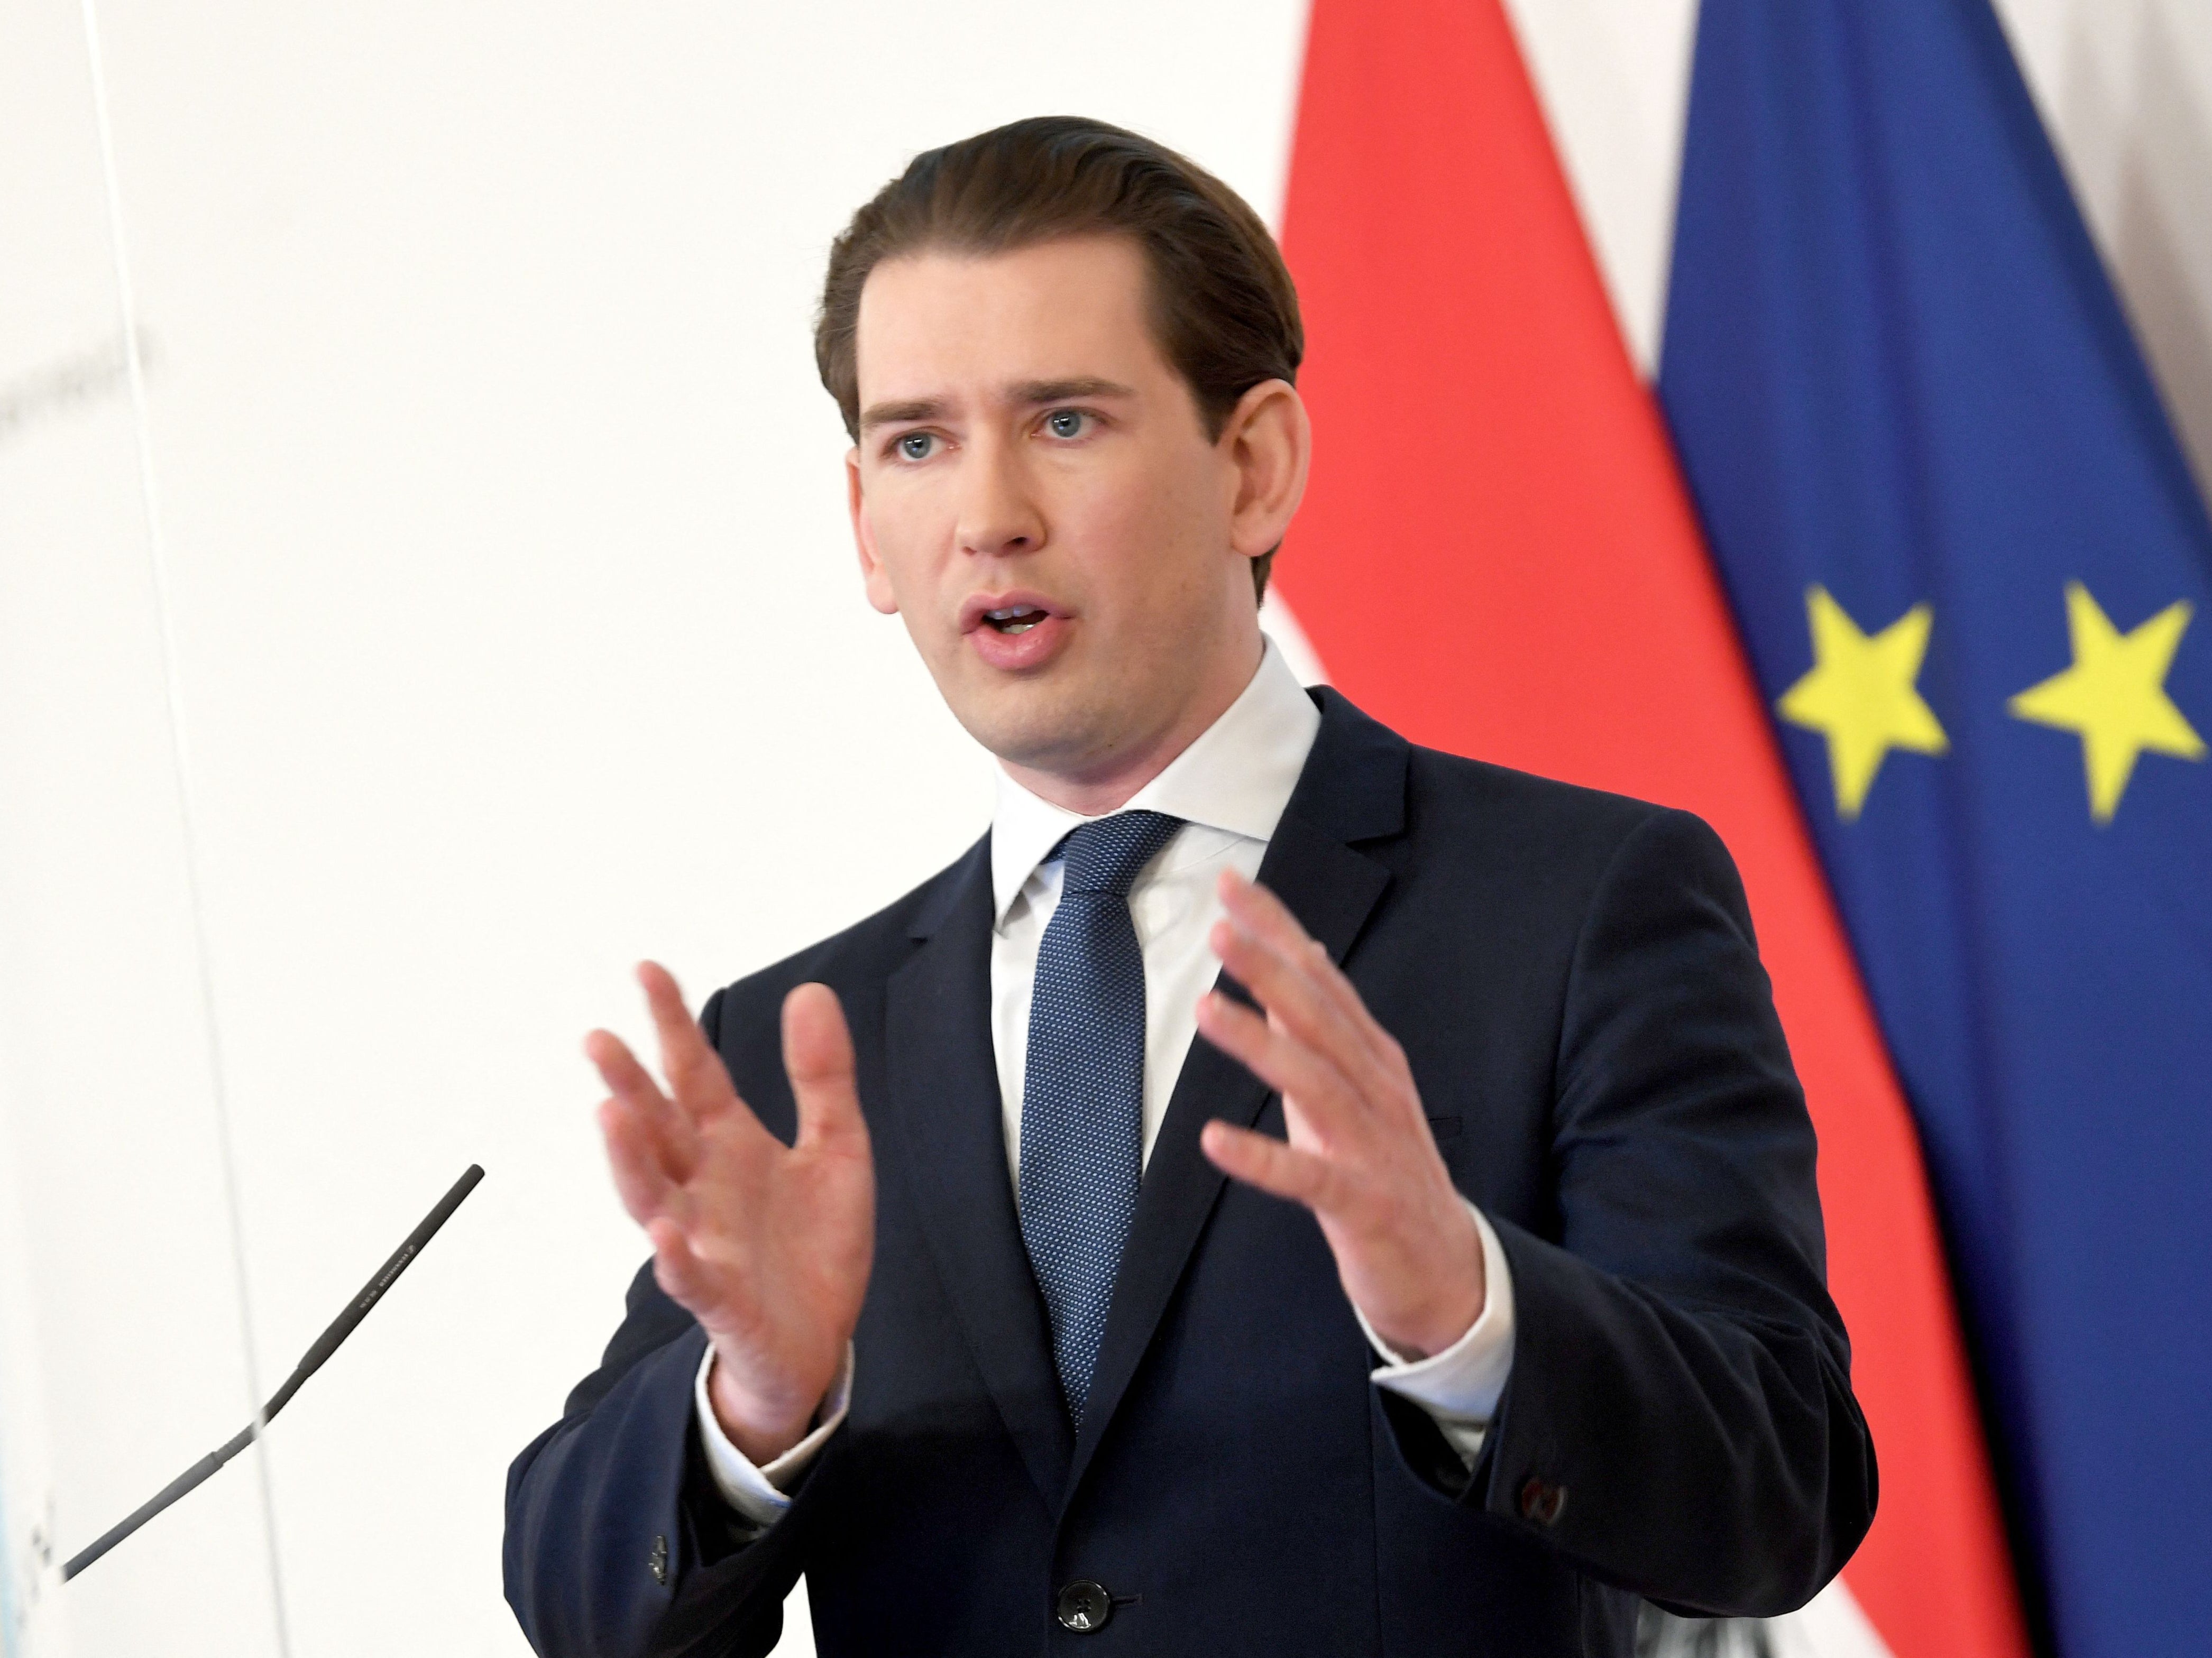 Sebastian Kurz was named as one of 10 suspects in a corruption probe this week